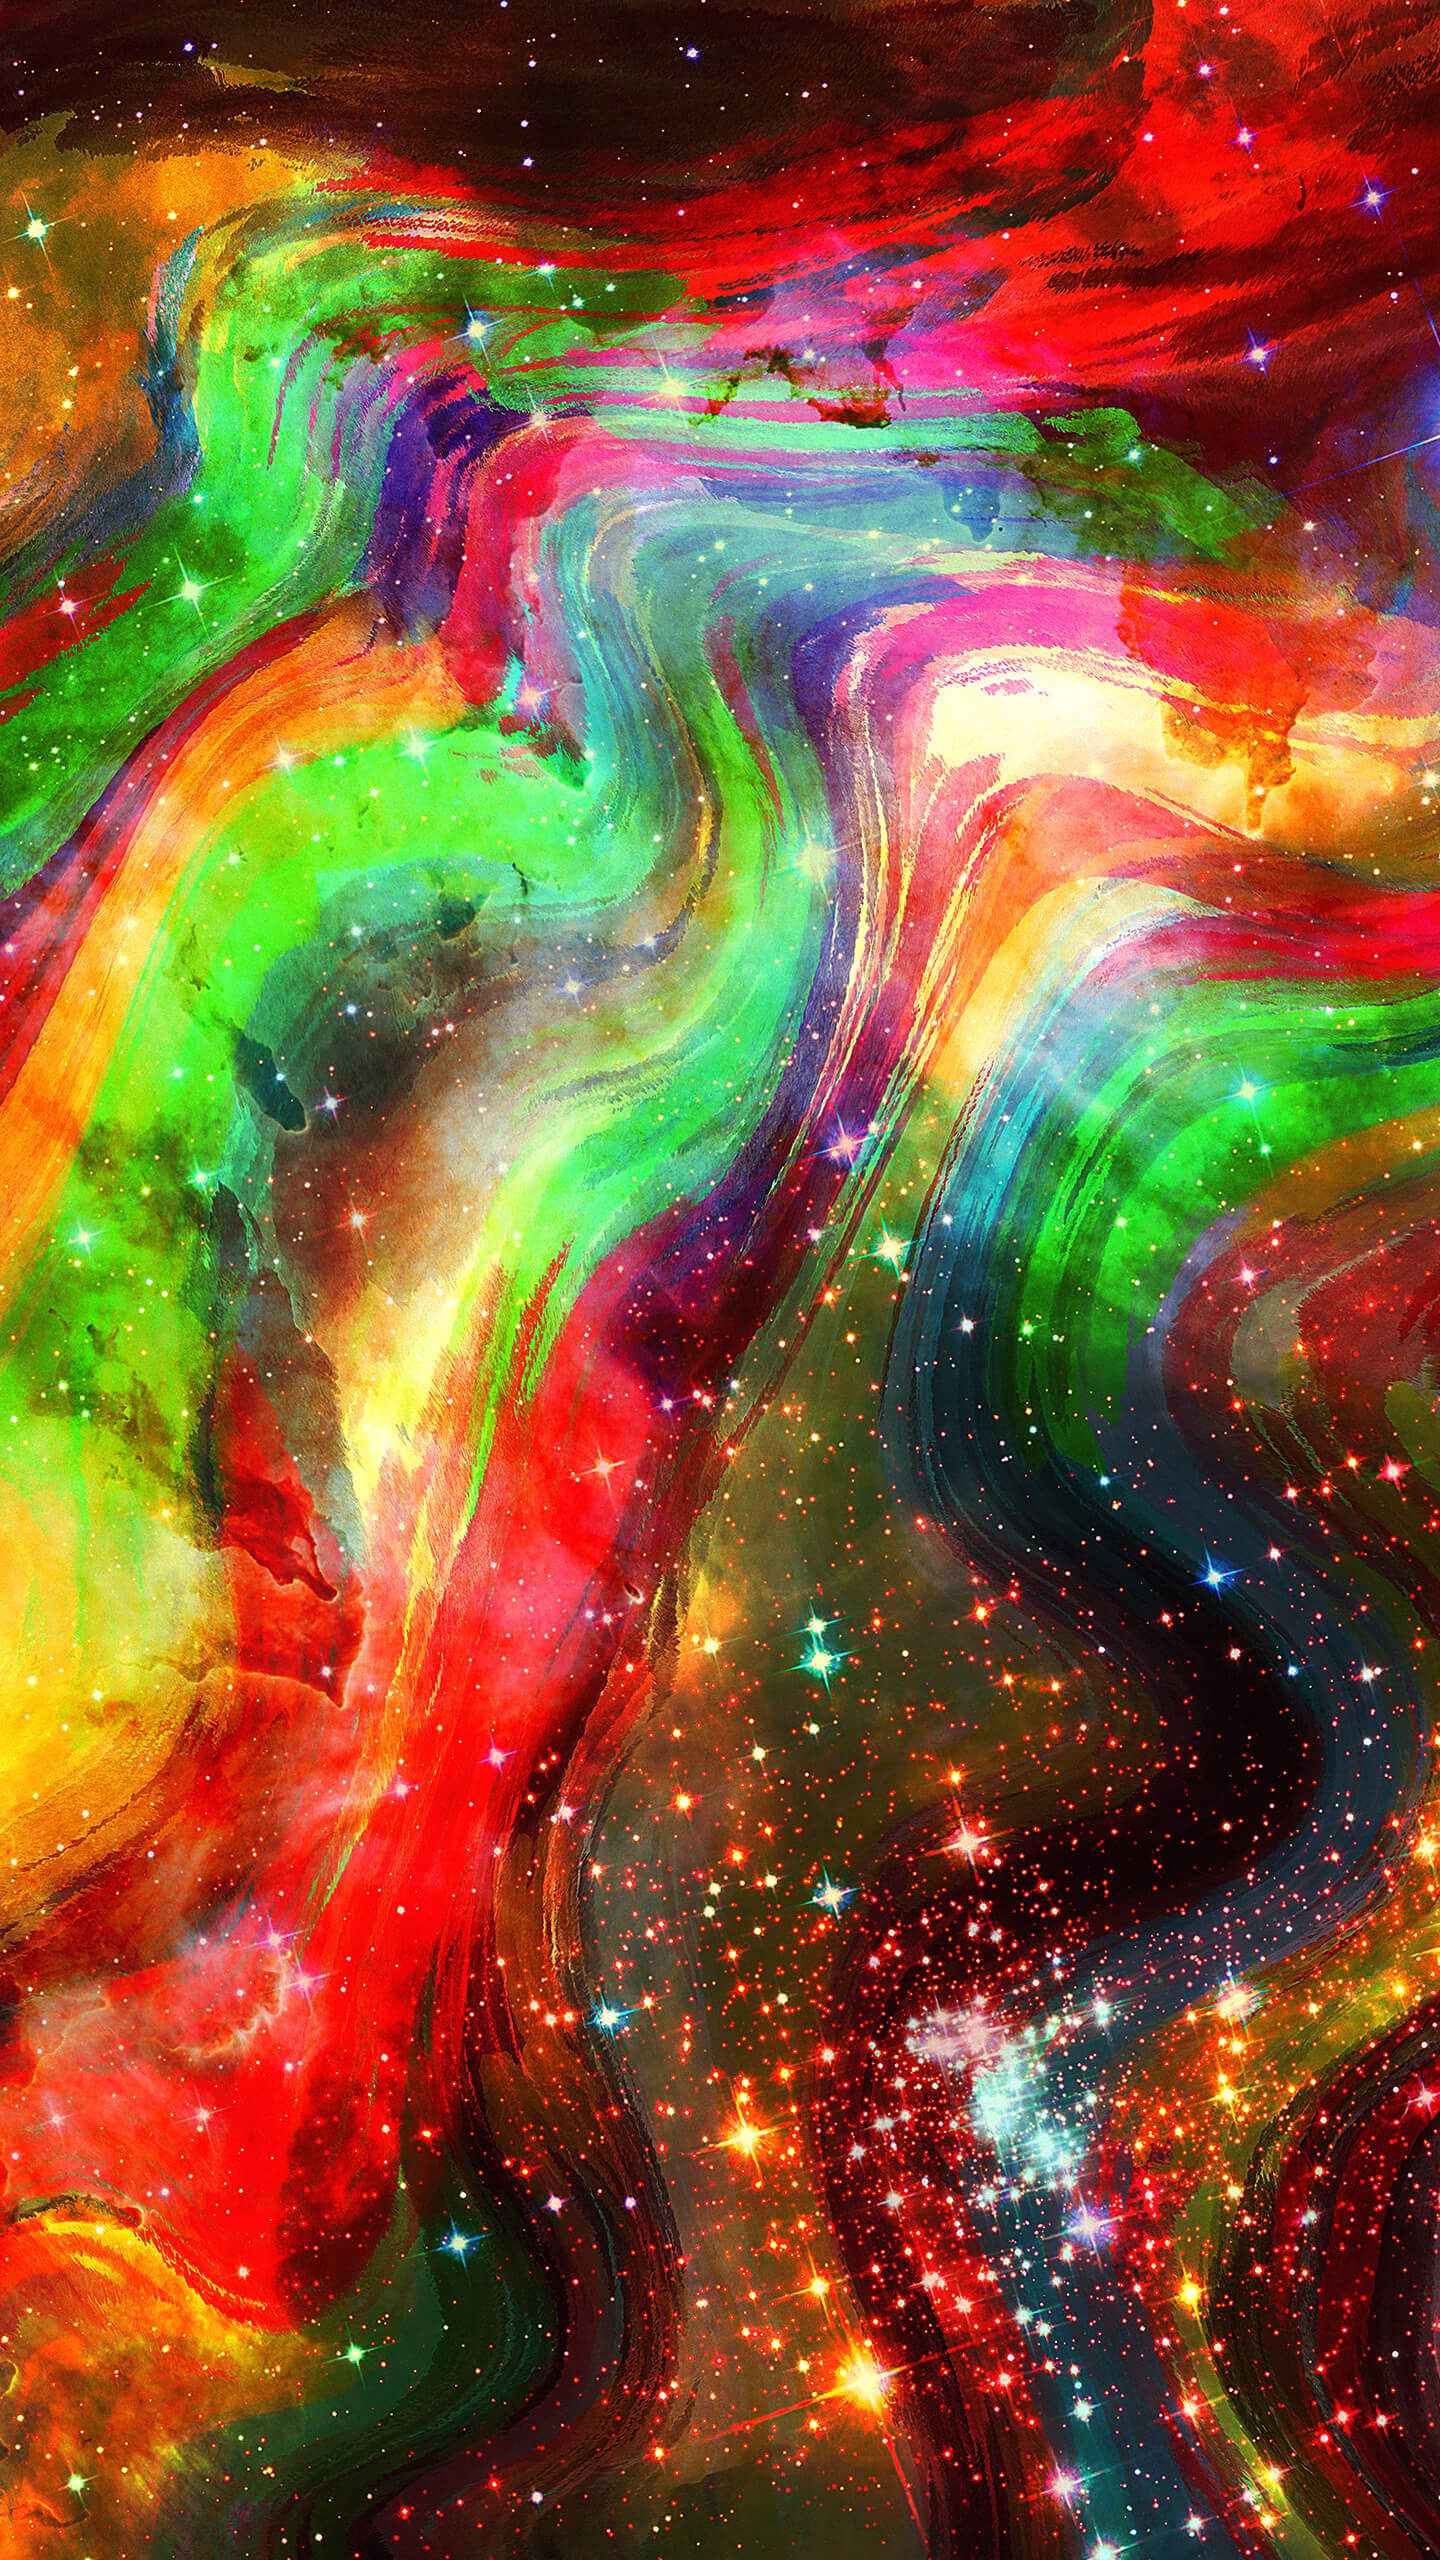 Bright Colour Space IPhone Wallpaper - IPhone Wallpapers : iPhone Wallpapers